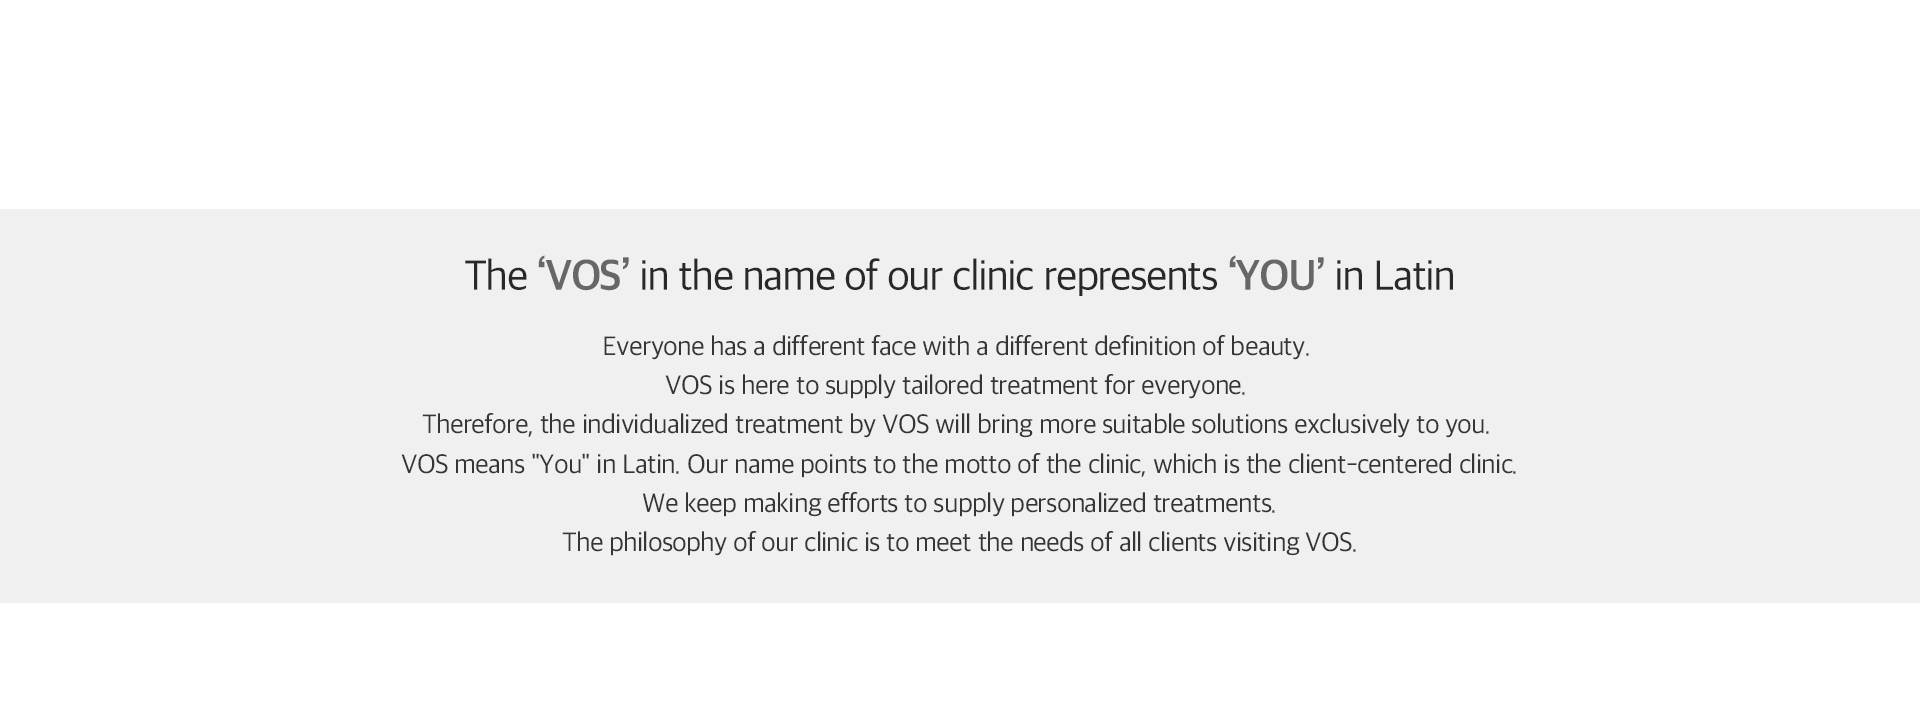 The 'VOS' in the name of our clinic represents 'YOU' in Latin